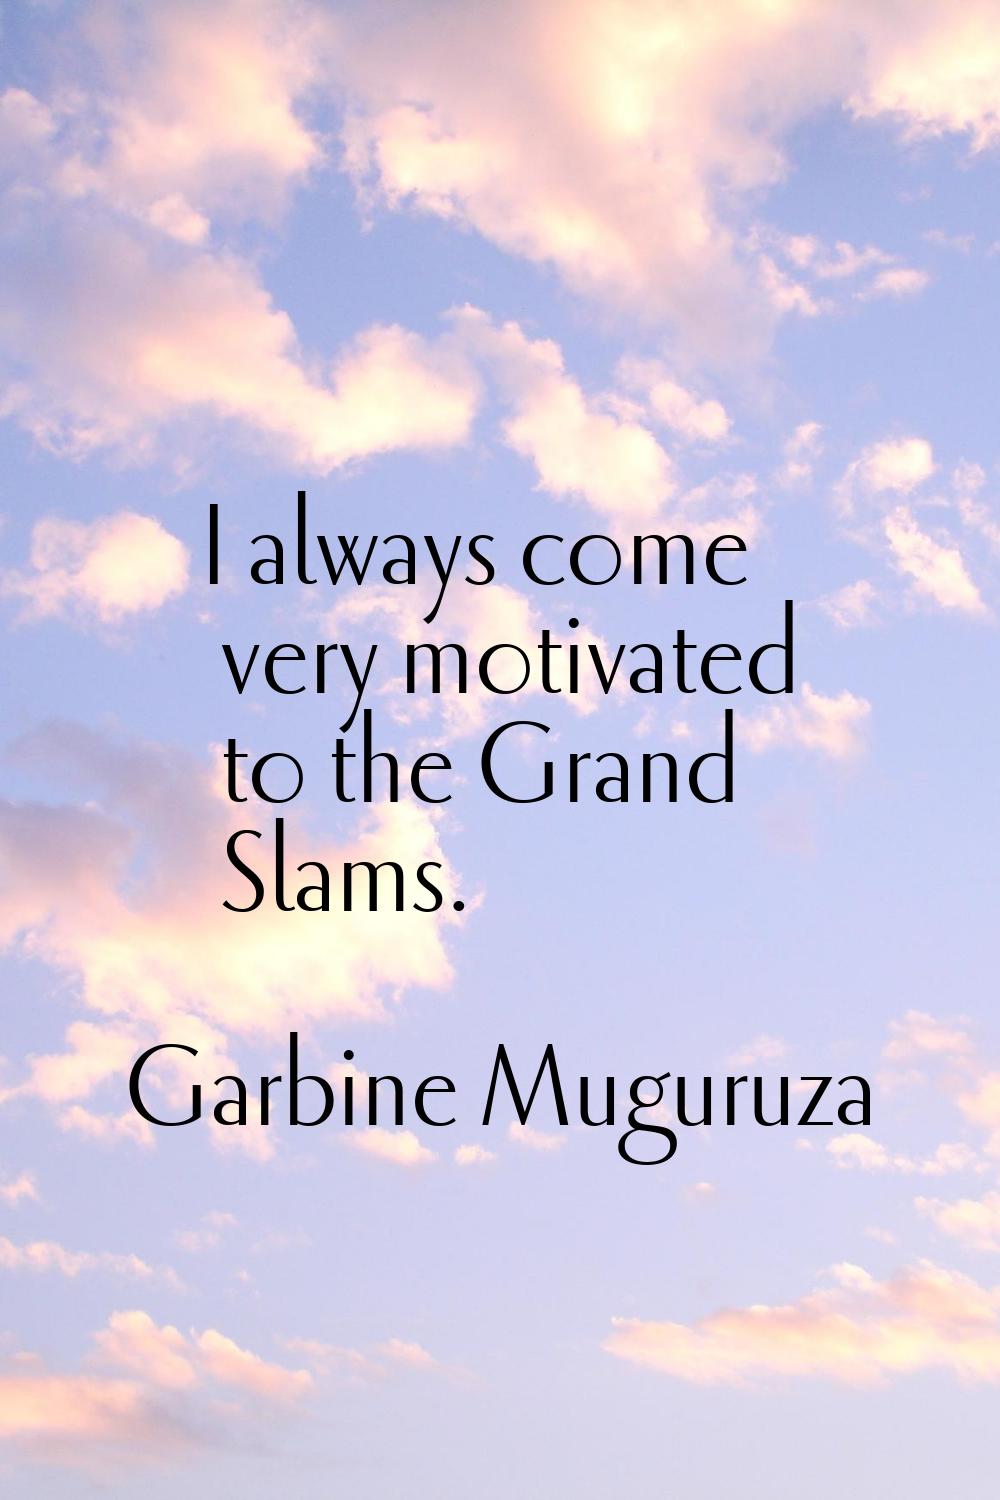 I always come very motivated to the Grand Slams.